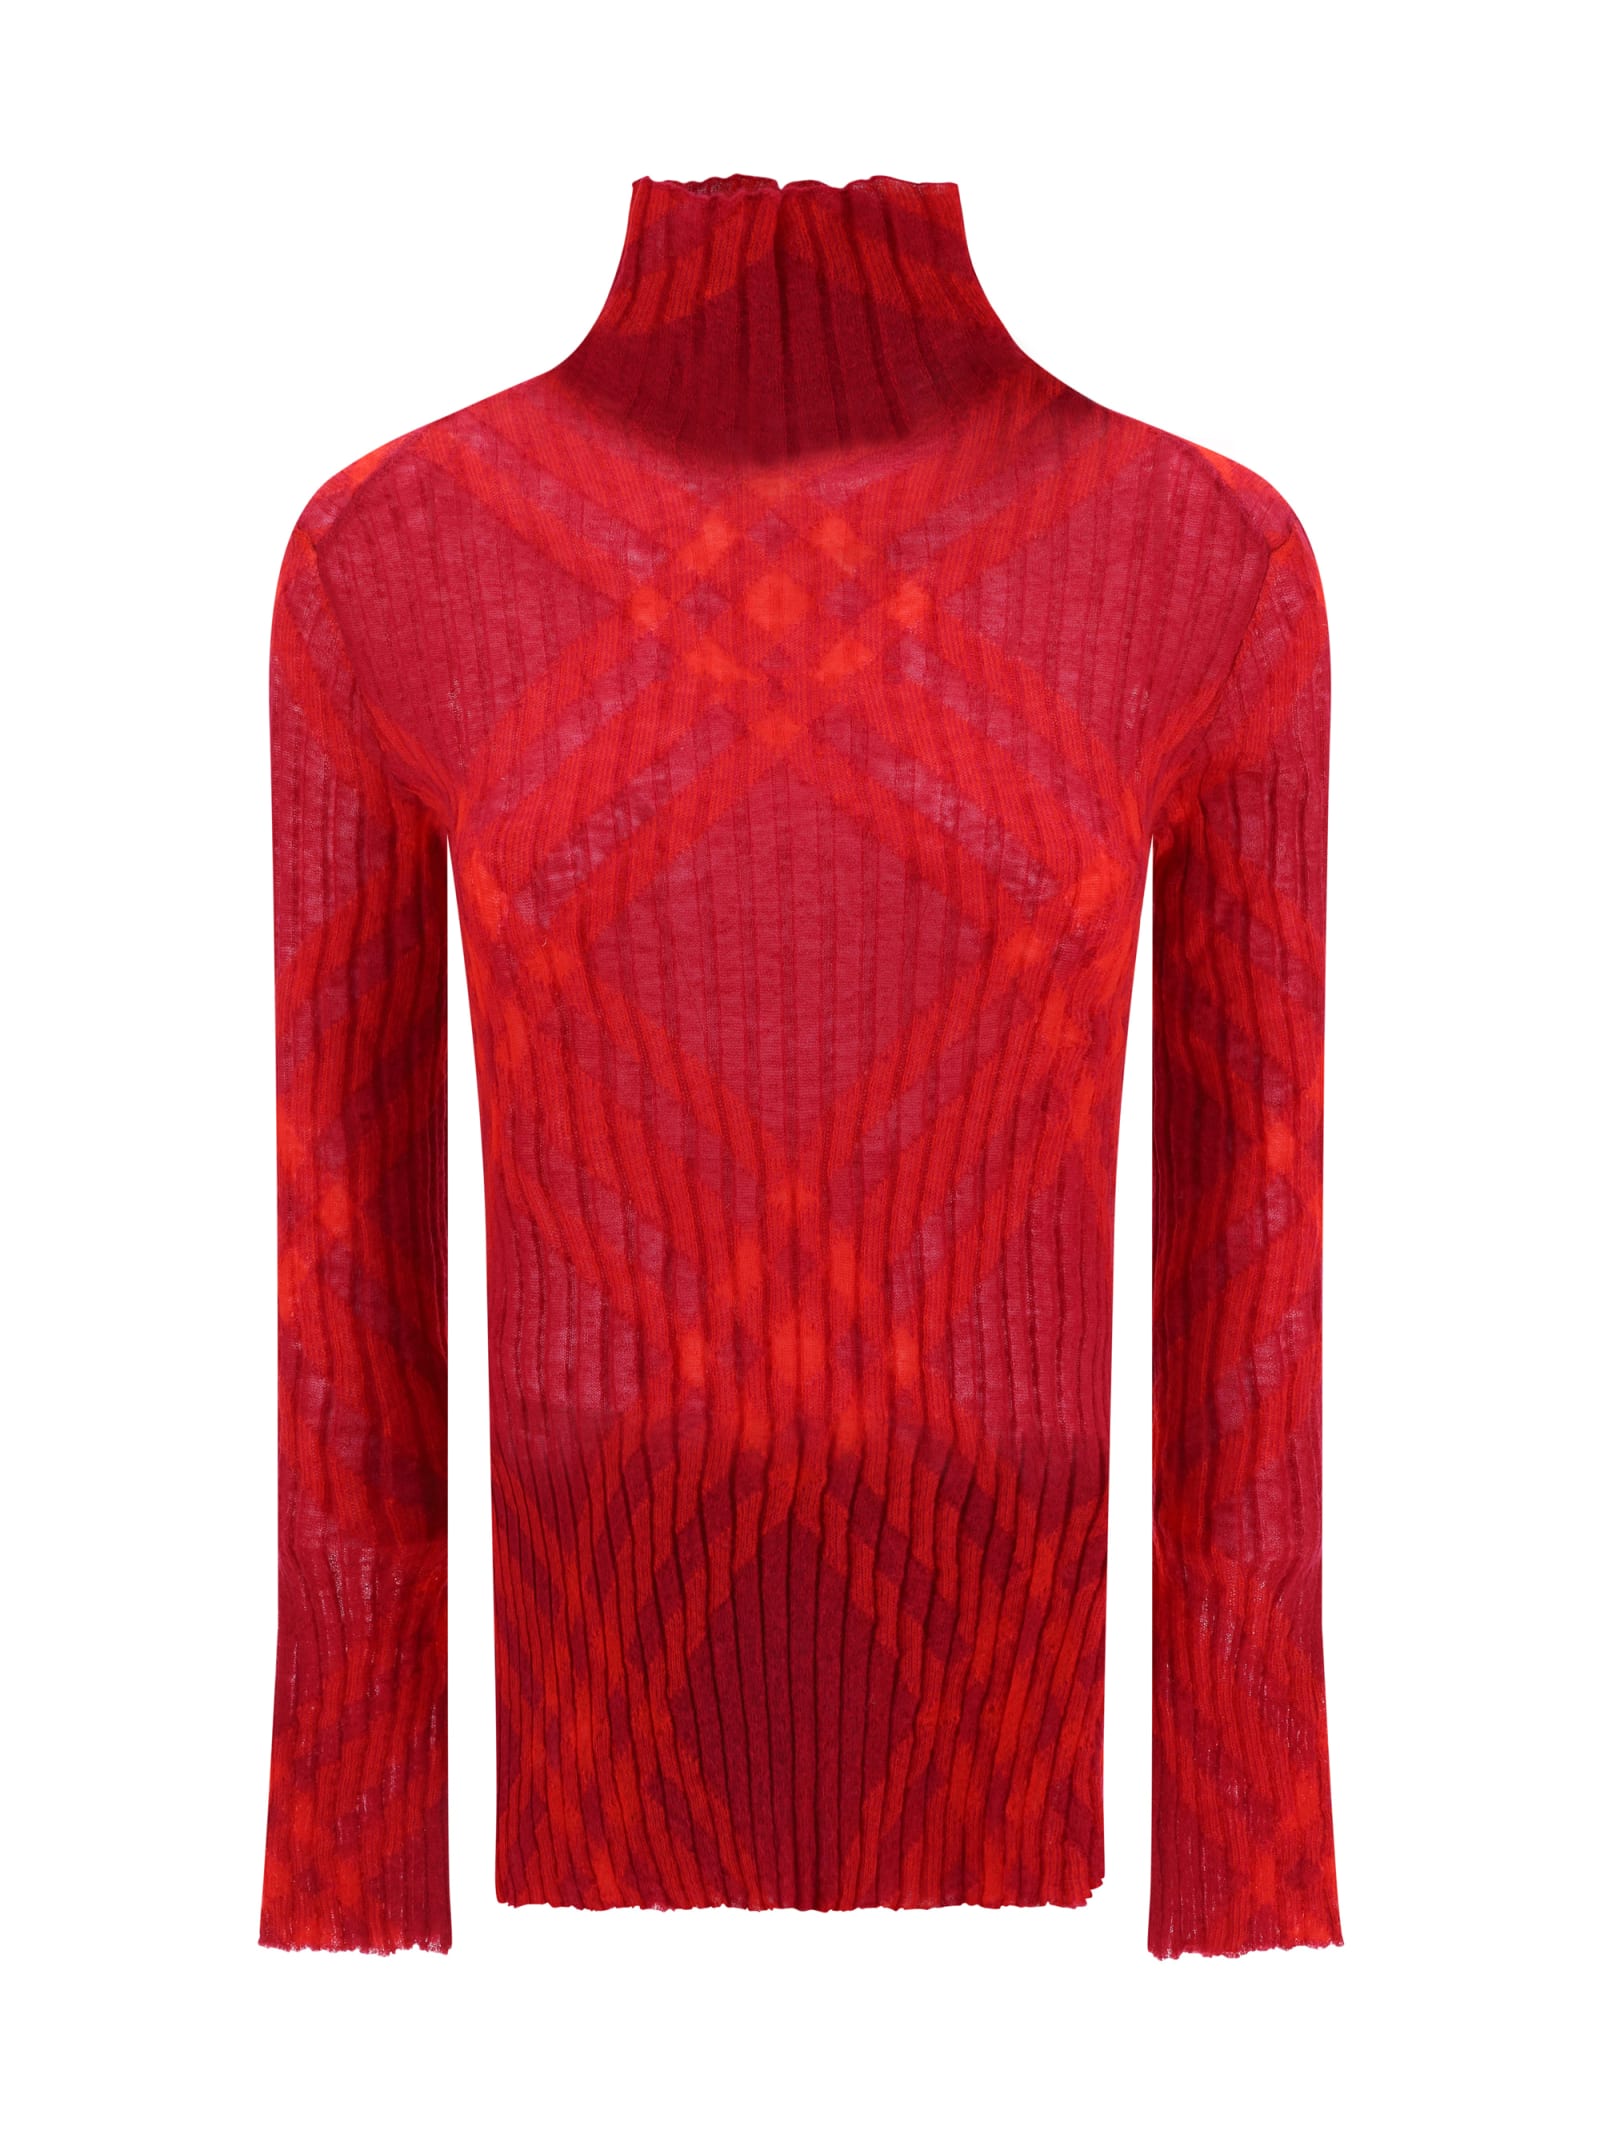 Burberry Turtleneck Sweater In Ripple Ip Check